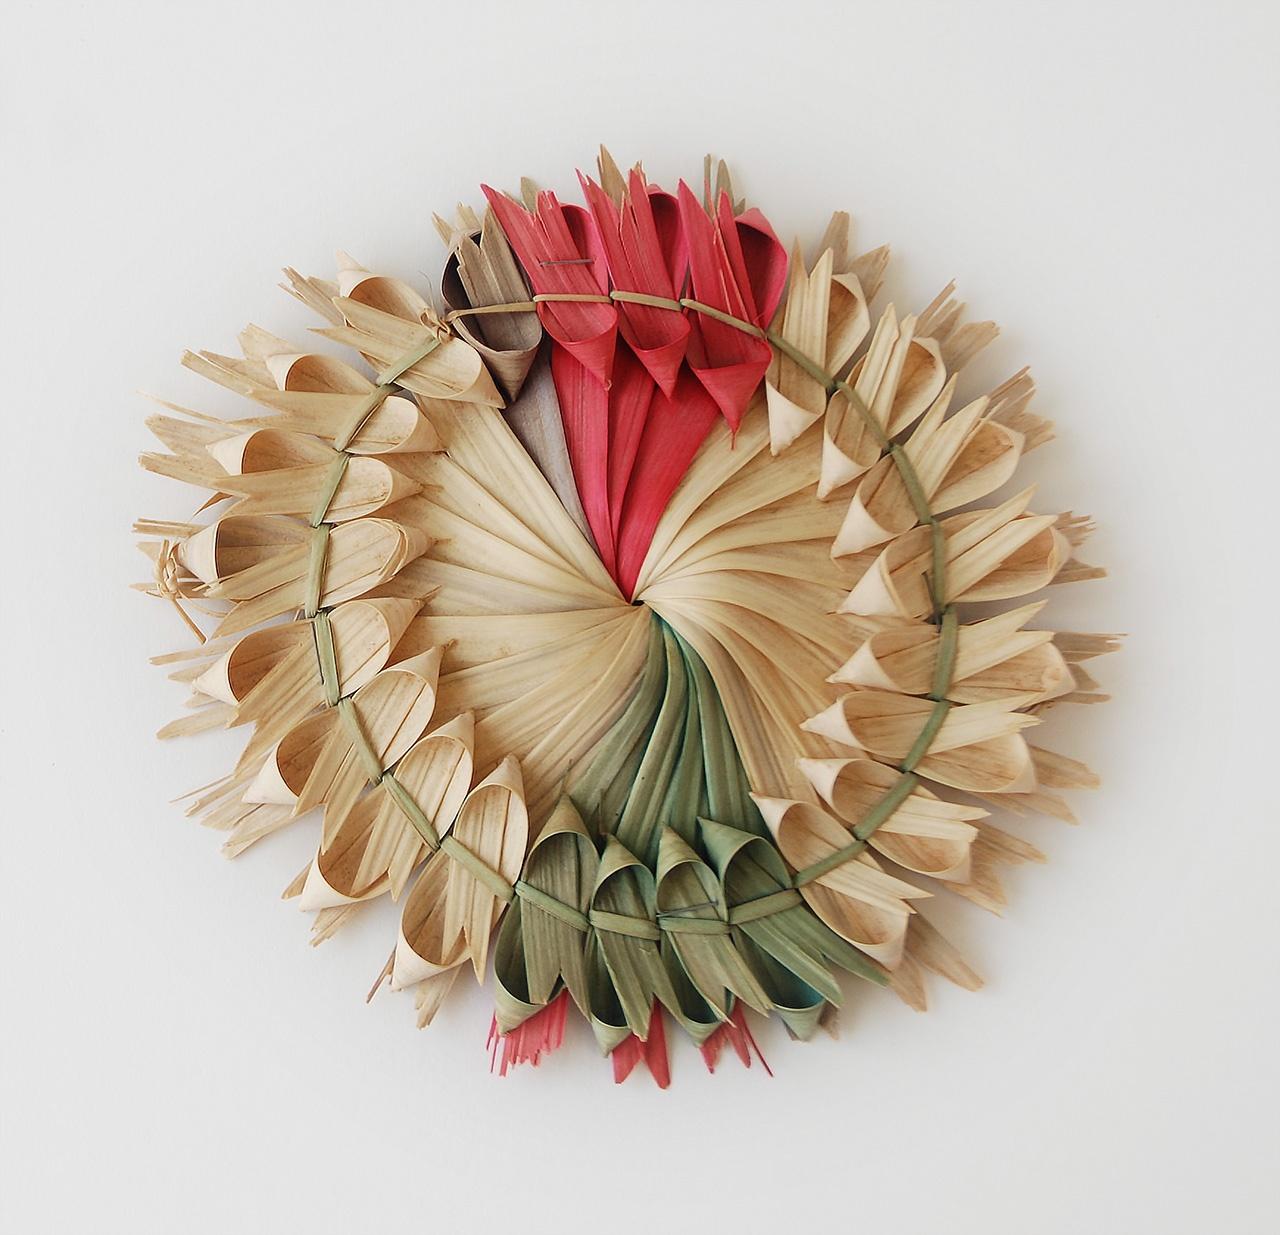 Objects, Borders and Neighbors, Woven Ornament